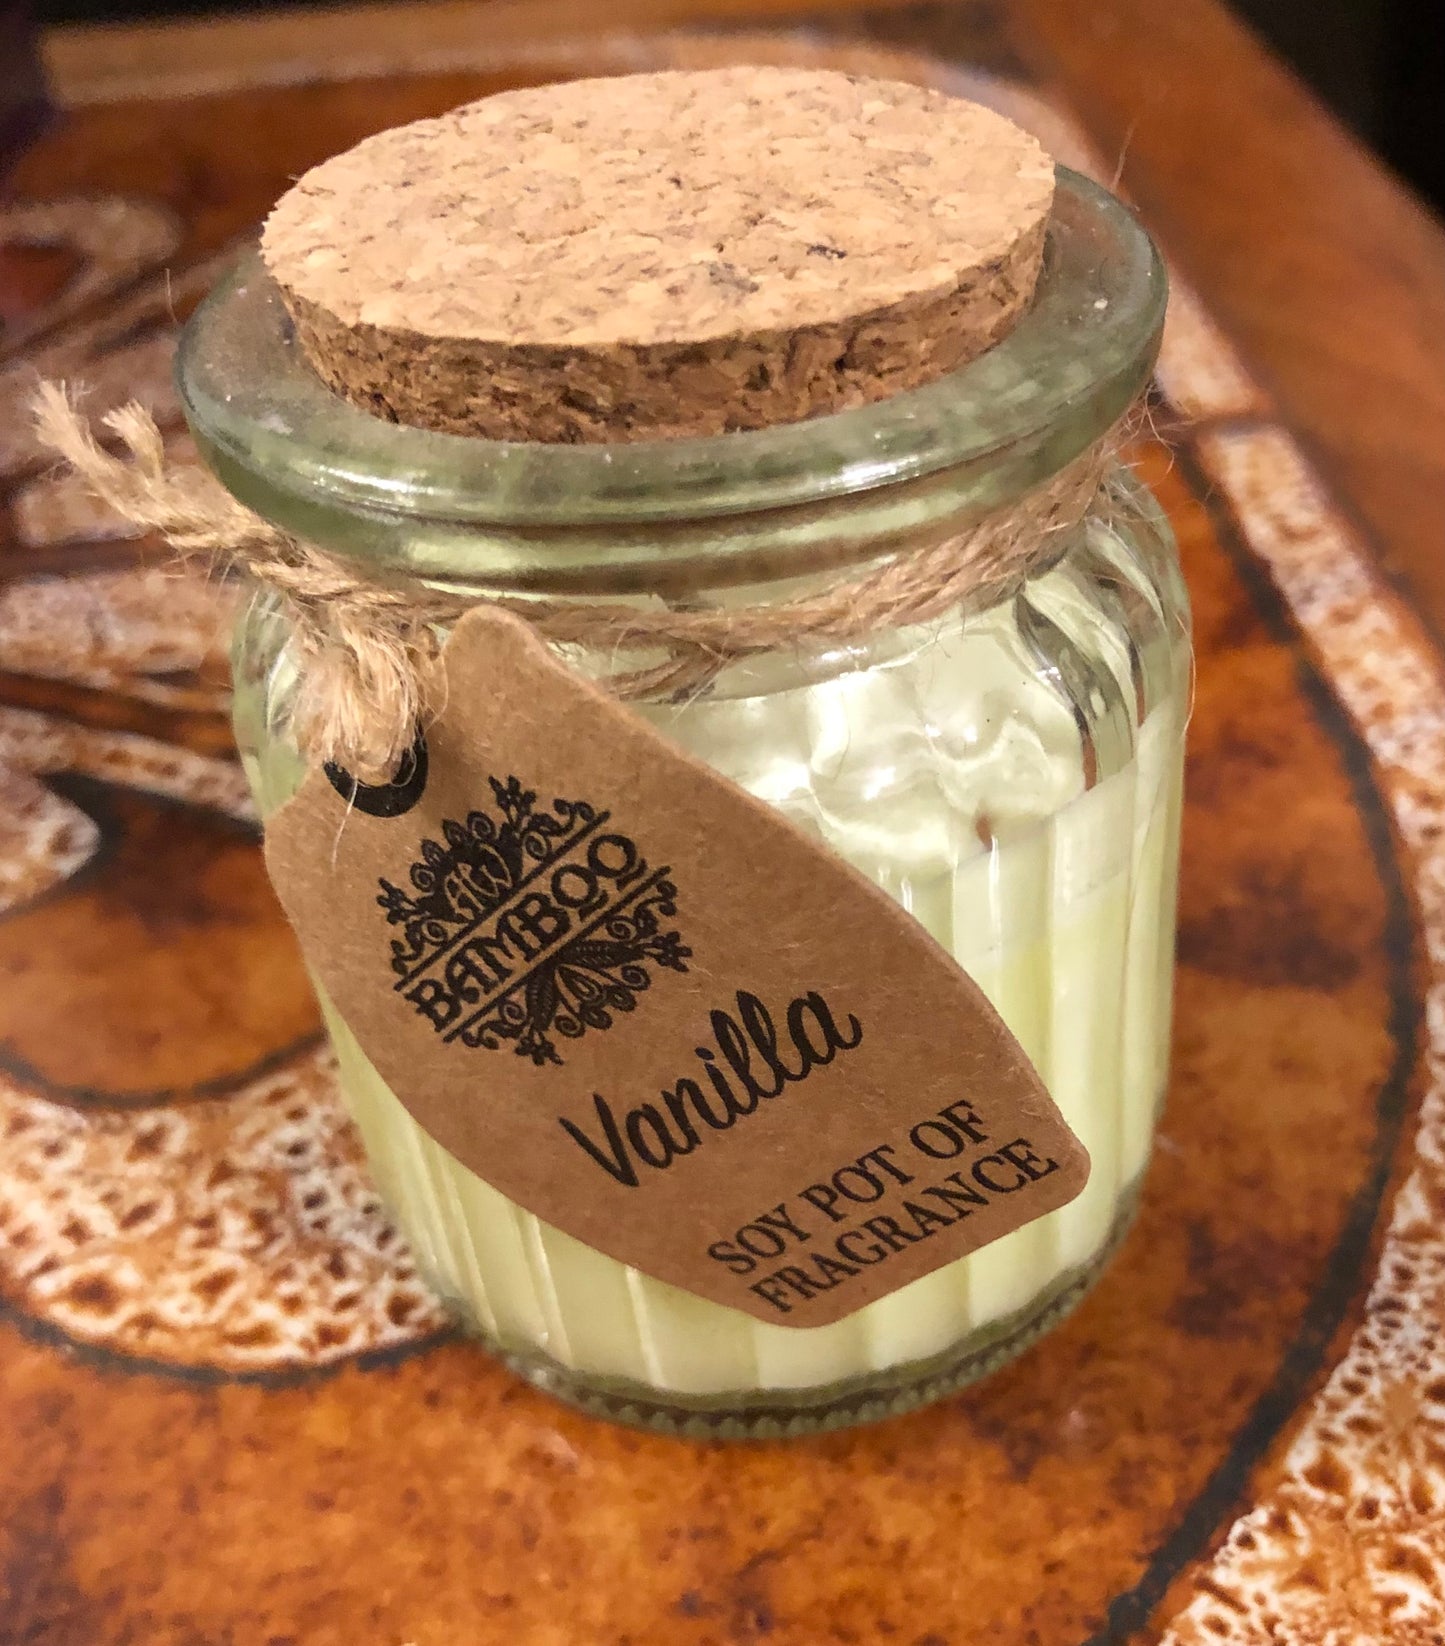 The Vanilla Soy Pot Candle